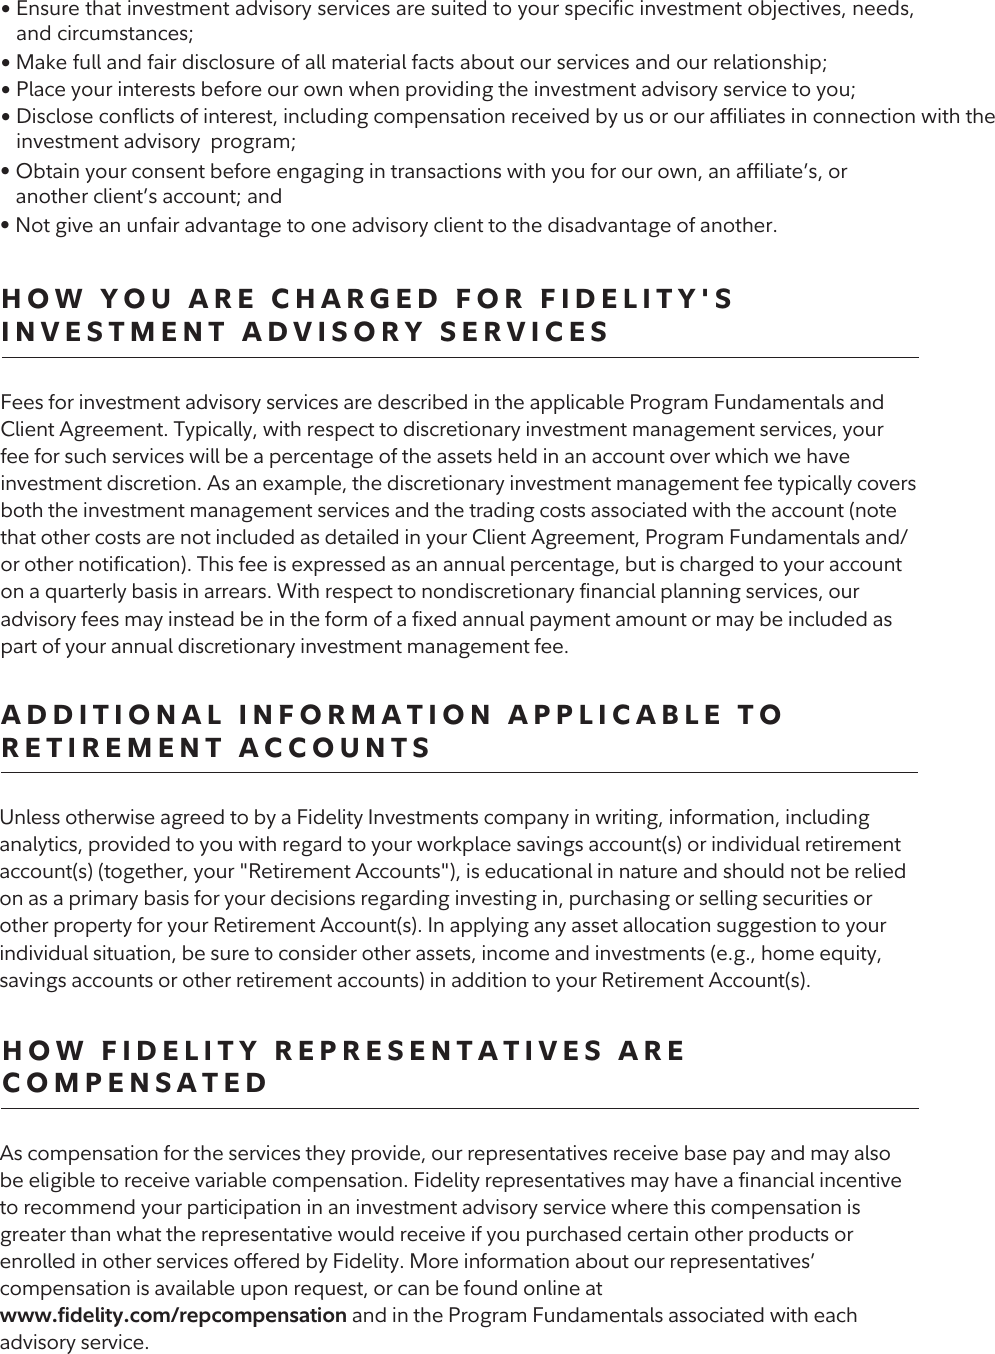 Page 3 of 4 - /BOSTON/xinet/BosWork/Jobs/34859/PIECE05/34859-05-MSC-KeyLimitAs Guide To Brokerage And Investment Advisory Services At Fidelity Investments